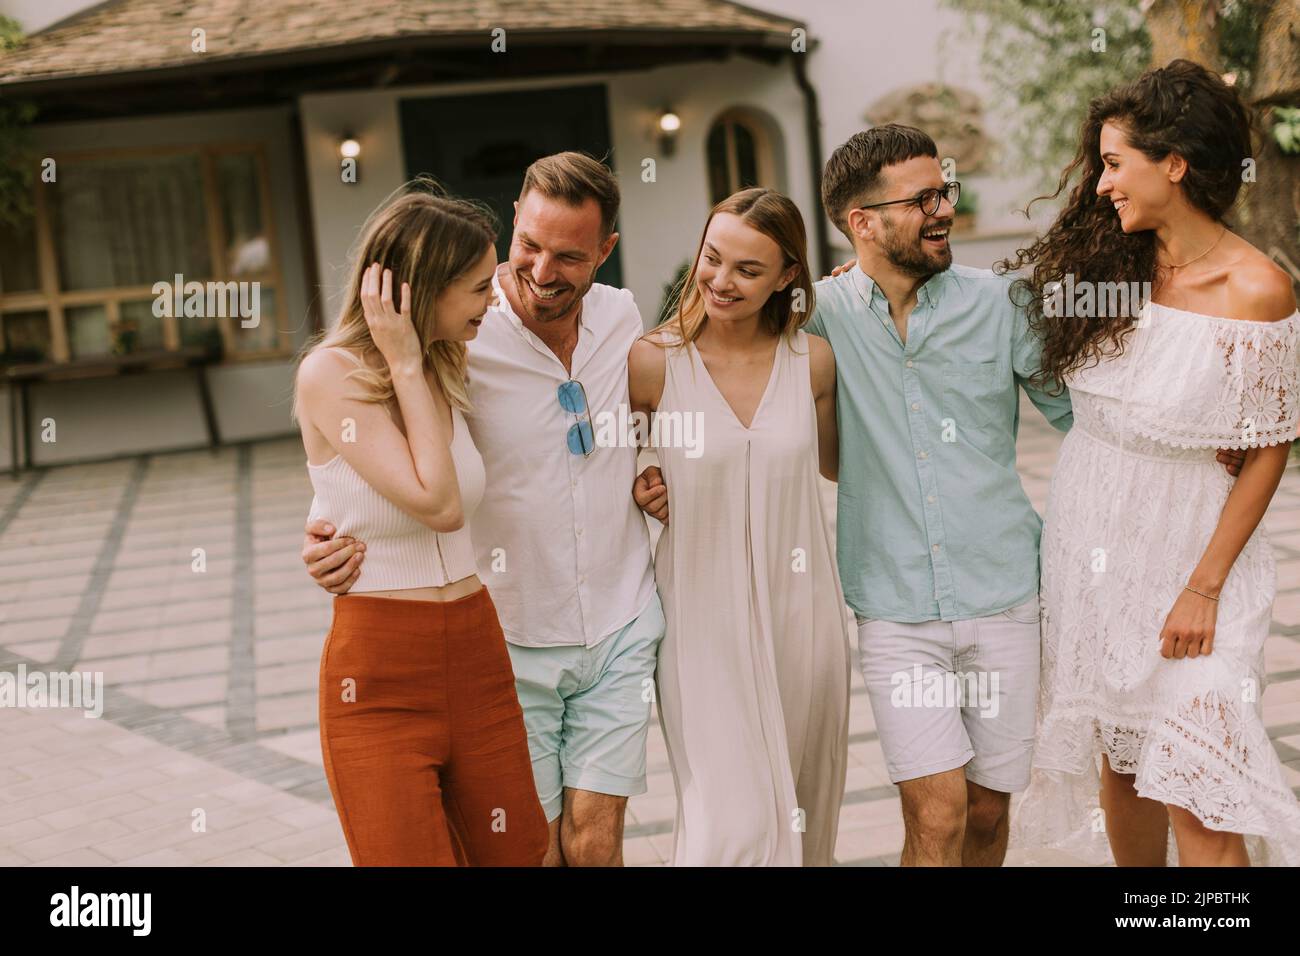 Group of young people having fun outdoors Stock Photo